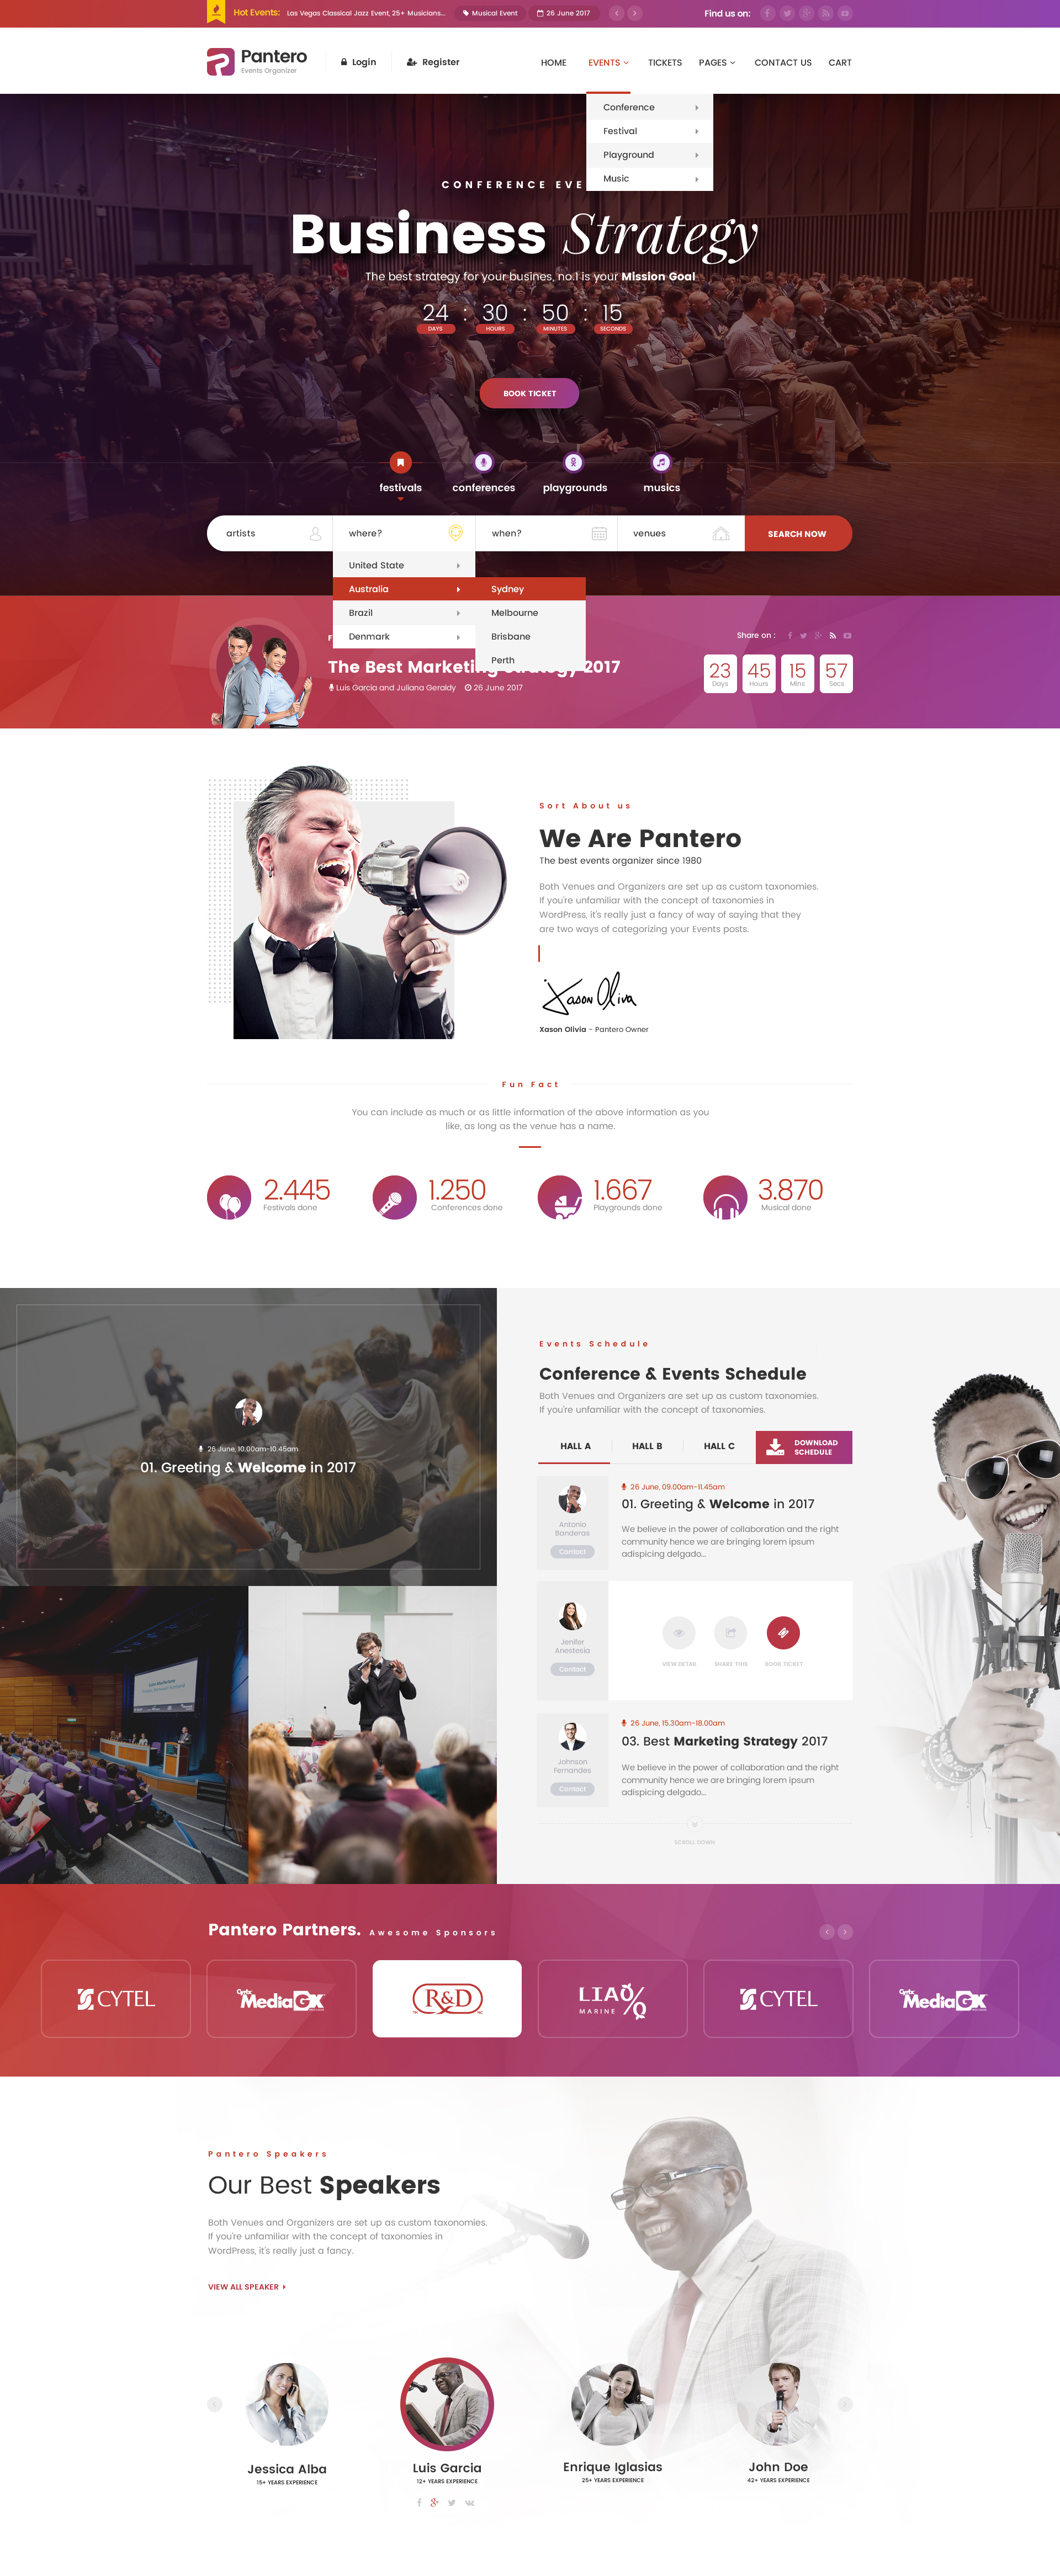 Pantero - Event & Conference PSD Template